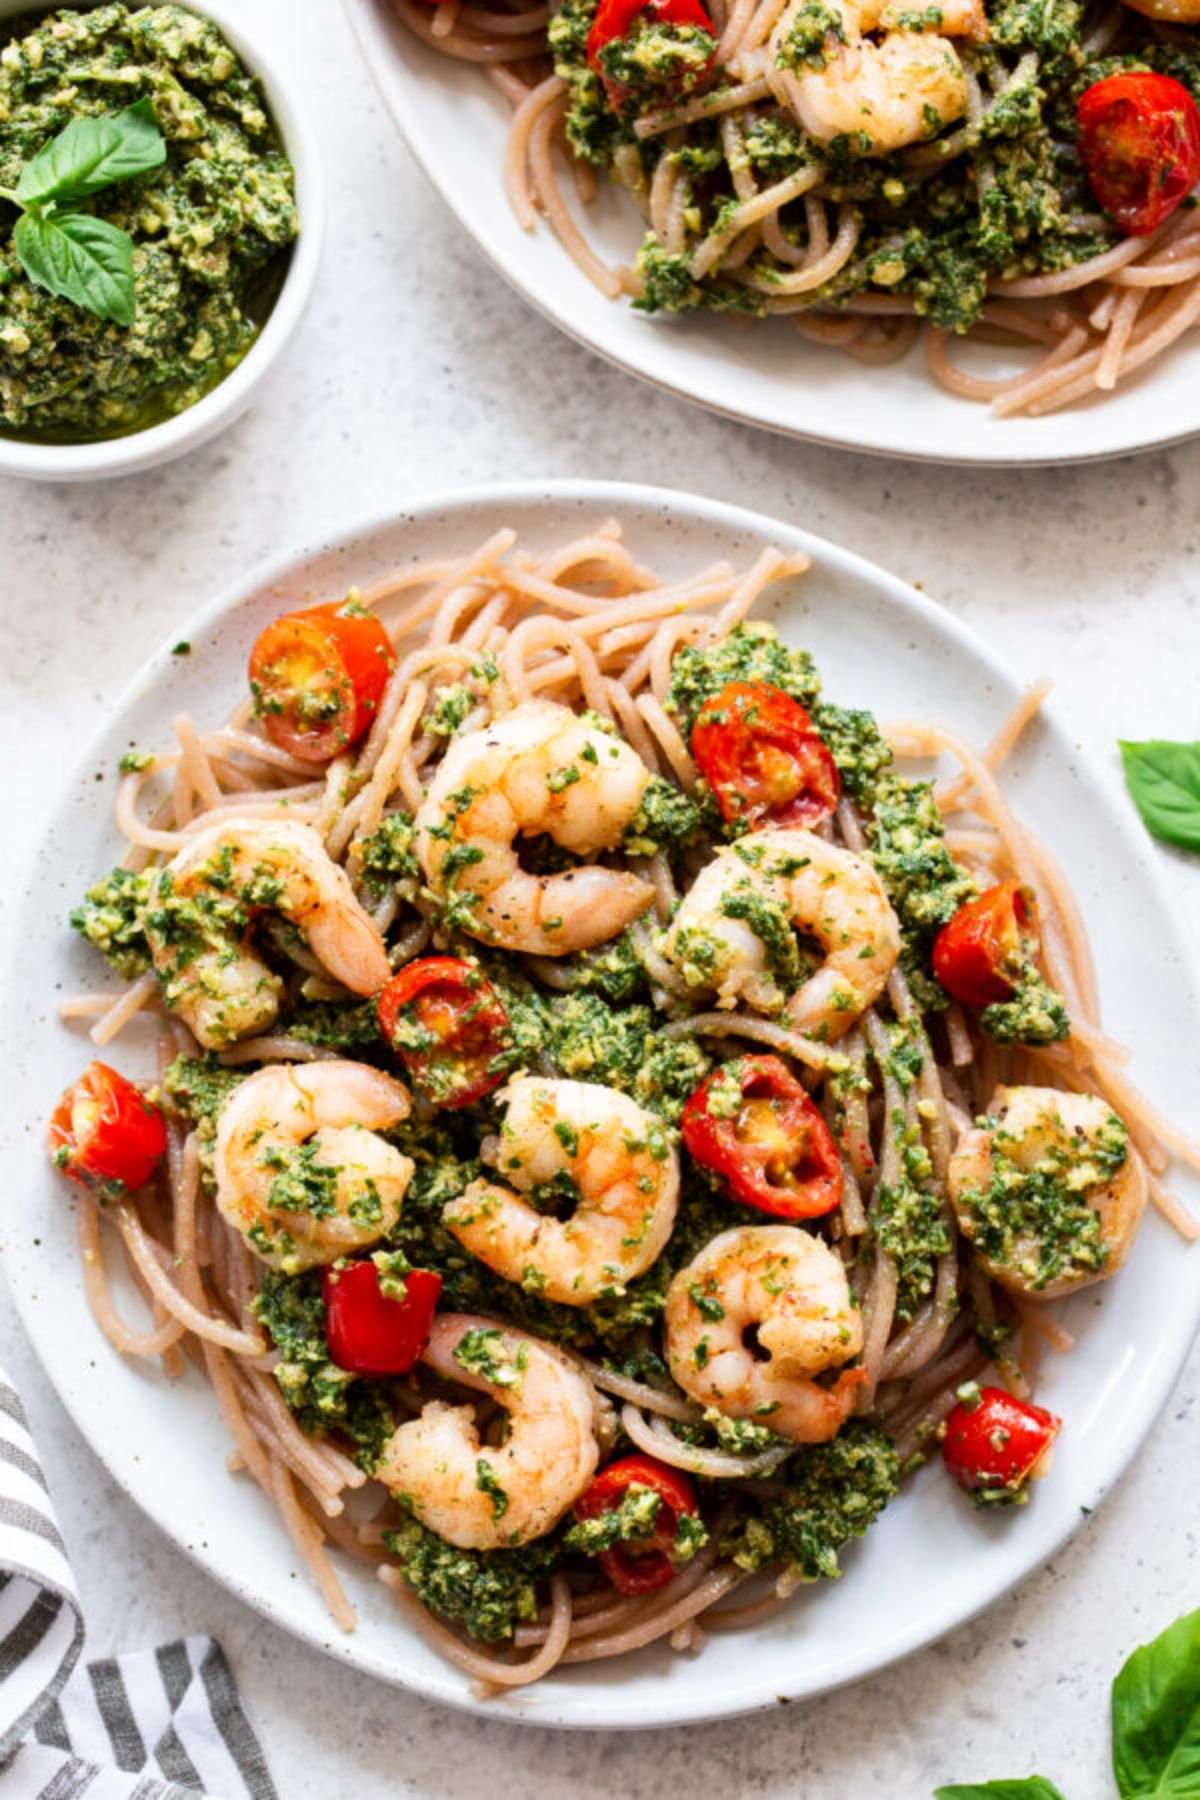 a plate full of noodles, shrimp and plum tomatoes drizzled with pesto sauce.